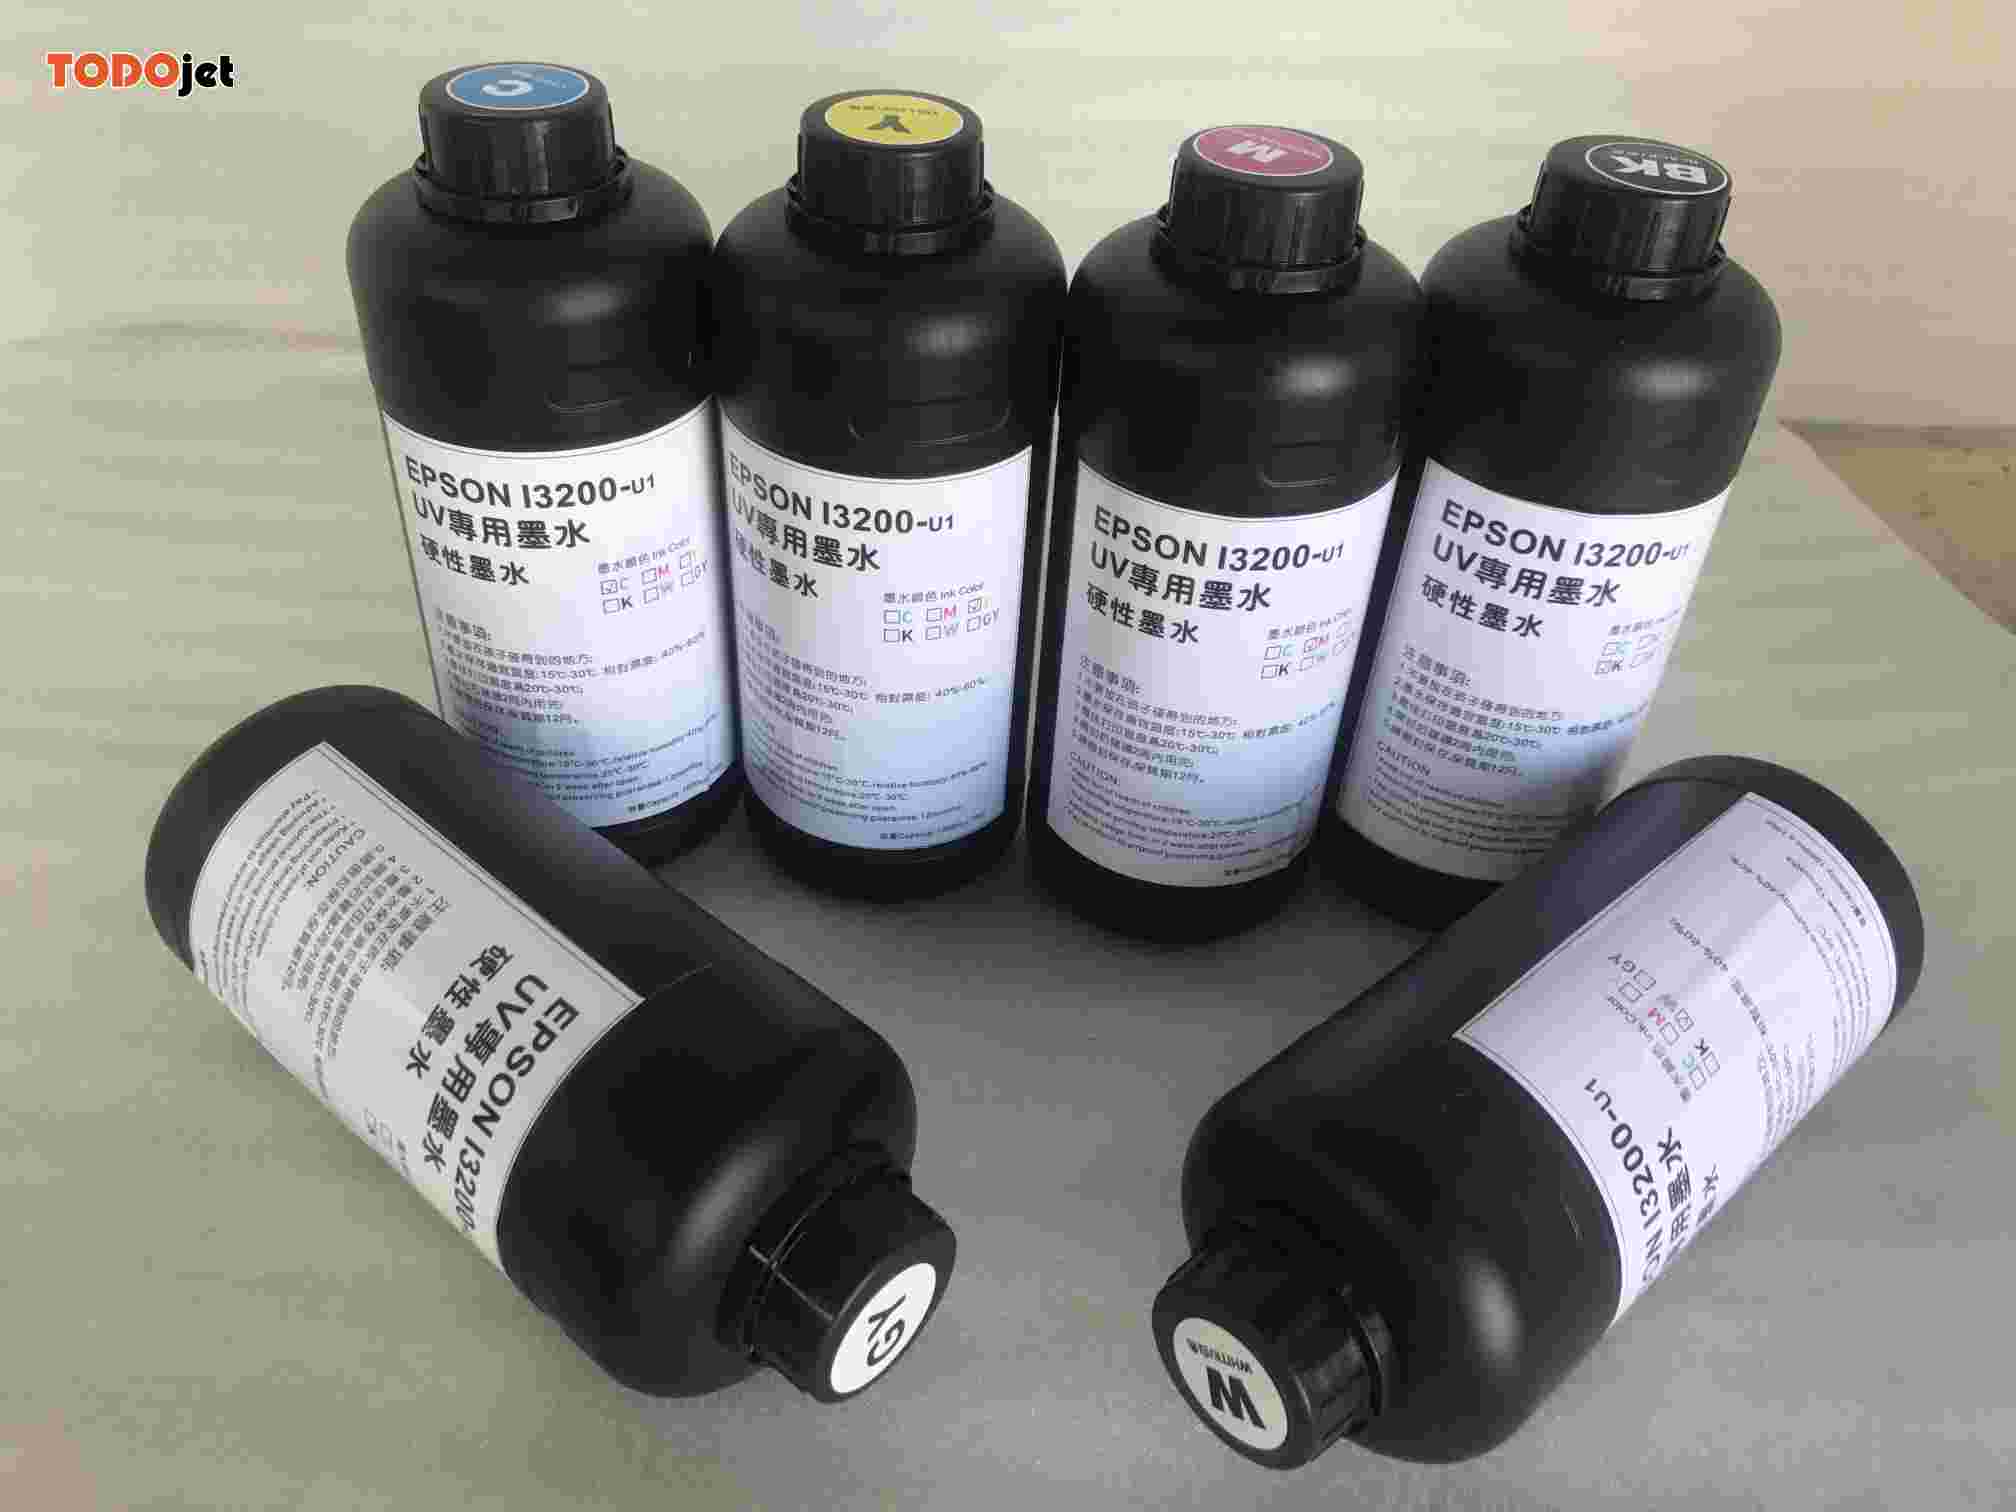 Fast Curing of UV Led Printer Ink UV Curable Ink for Epson printhead Price